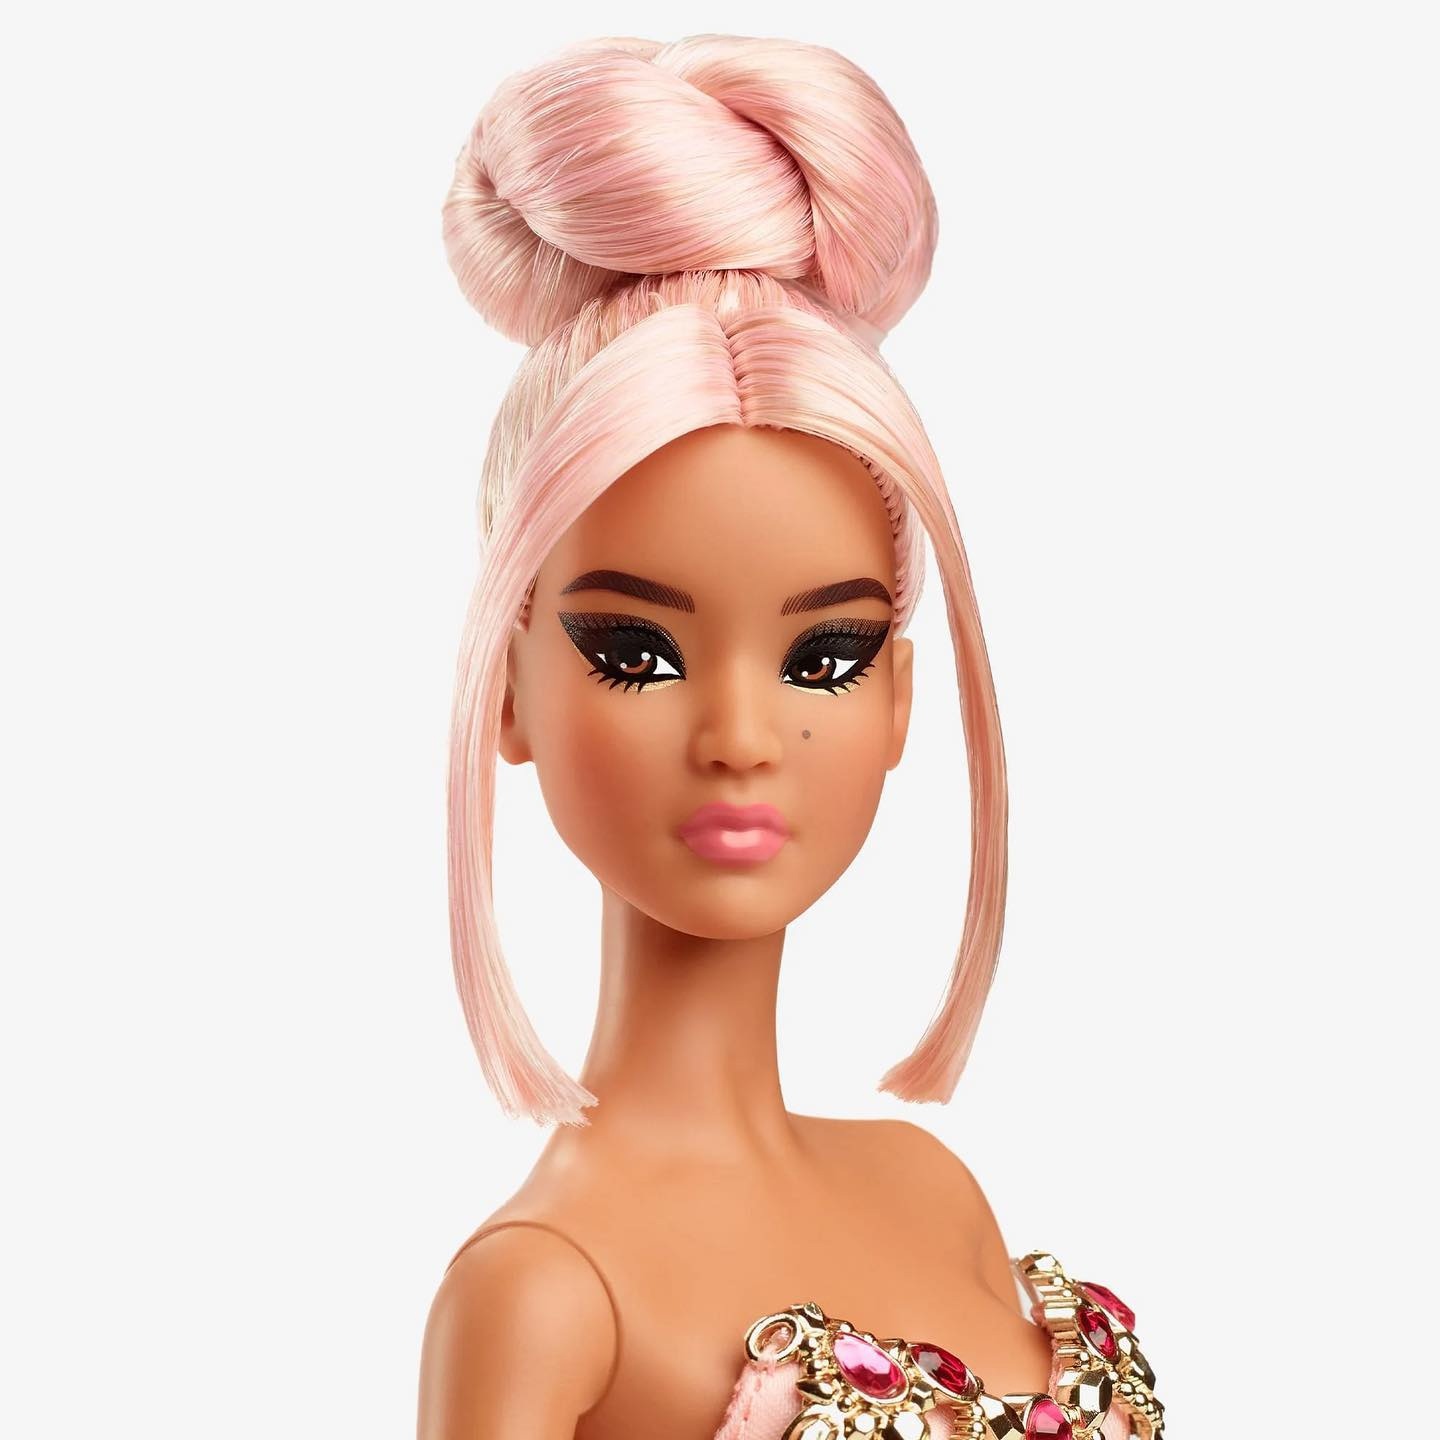 Barbie Signature Pink Collection Doll, Silkstone Barbie Doll in